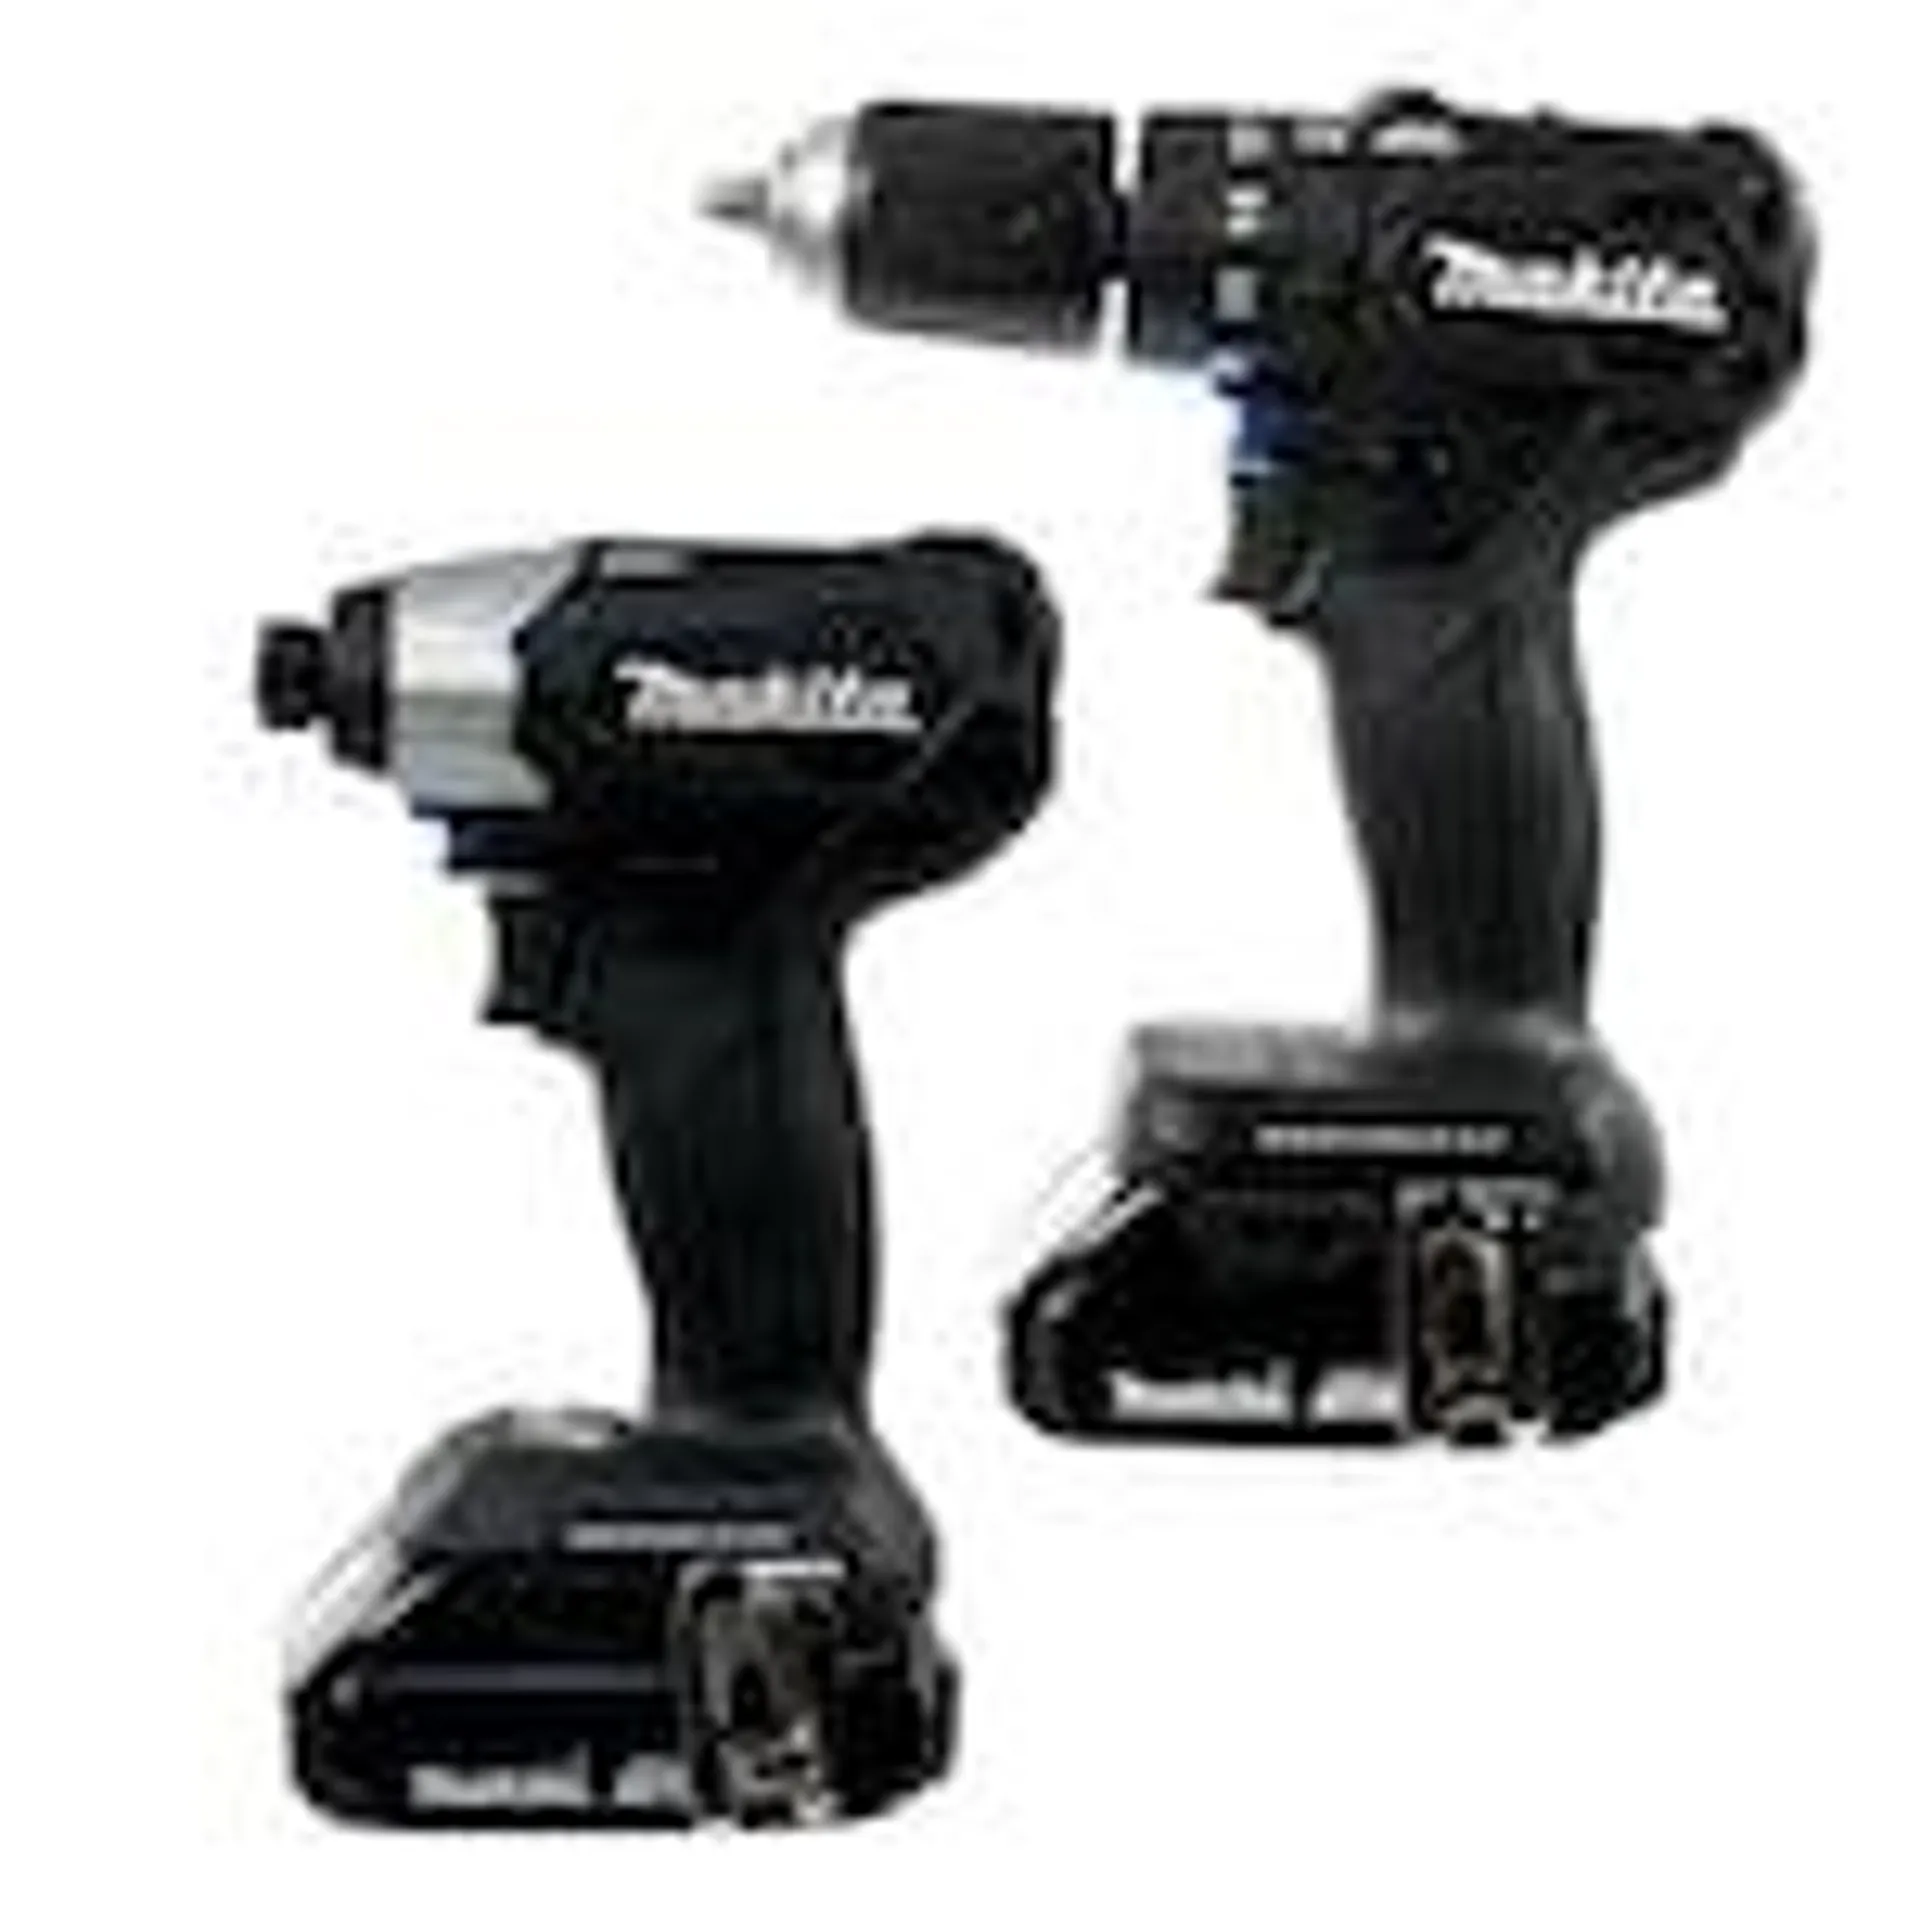 18V LXT BL Sub-Compact Hammer Drill-Driver & Impact Driver Kit w/2 Batteries (1.5Ah), Charger & Bag